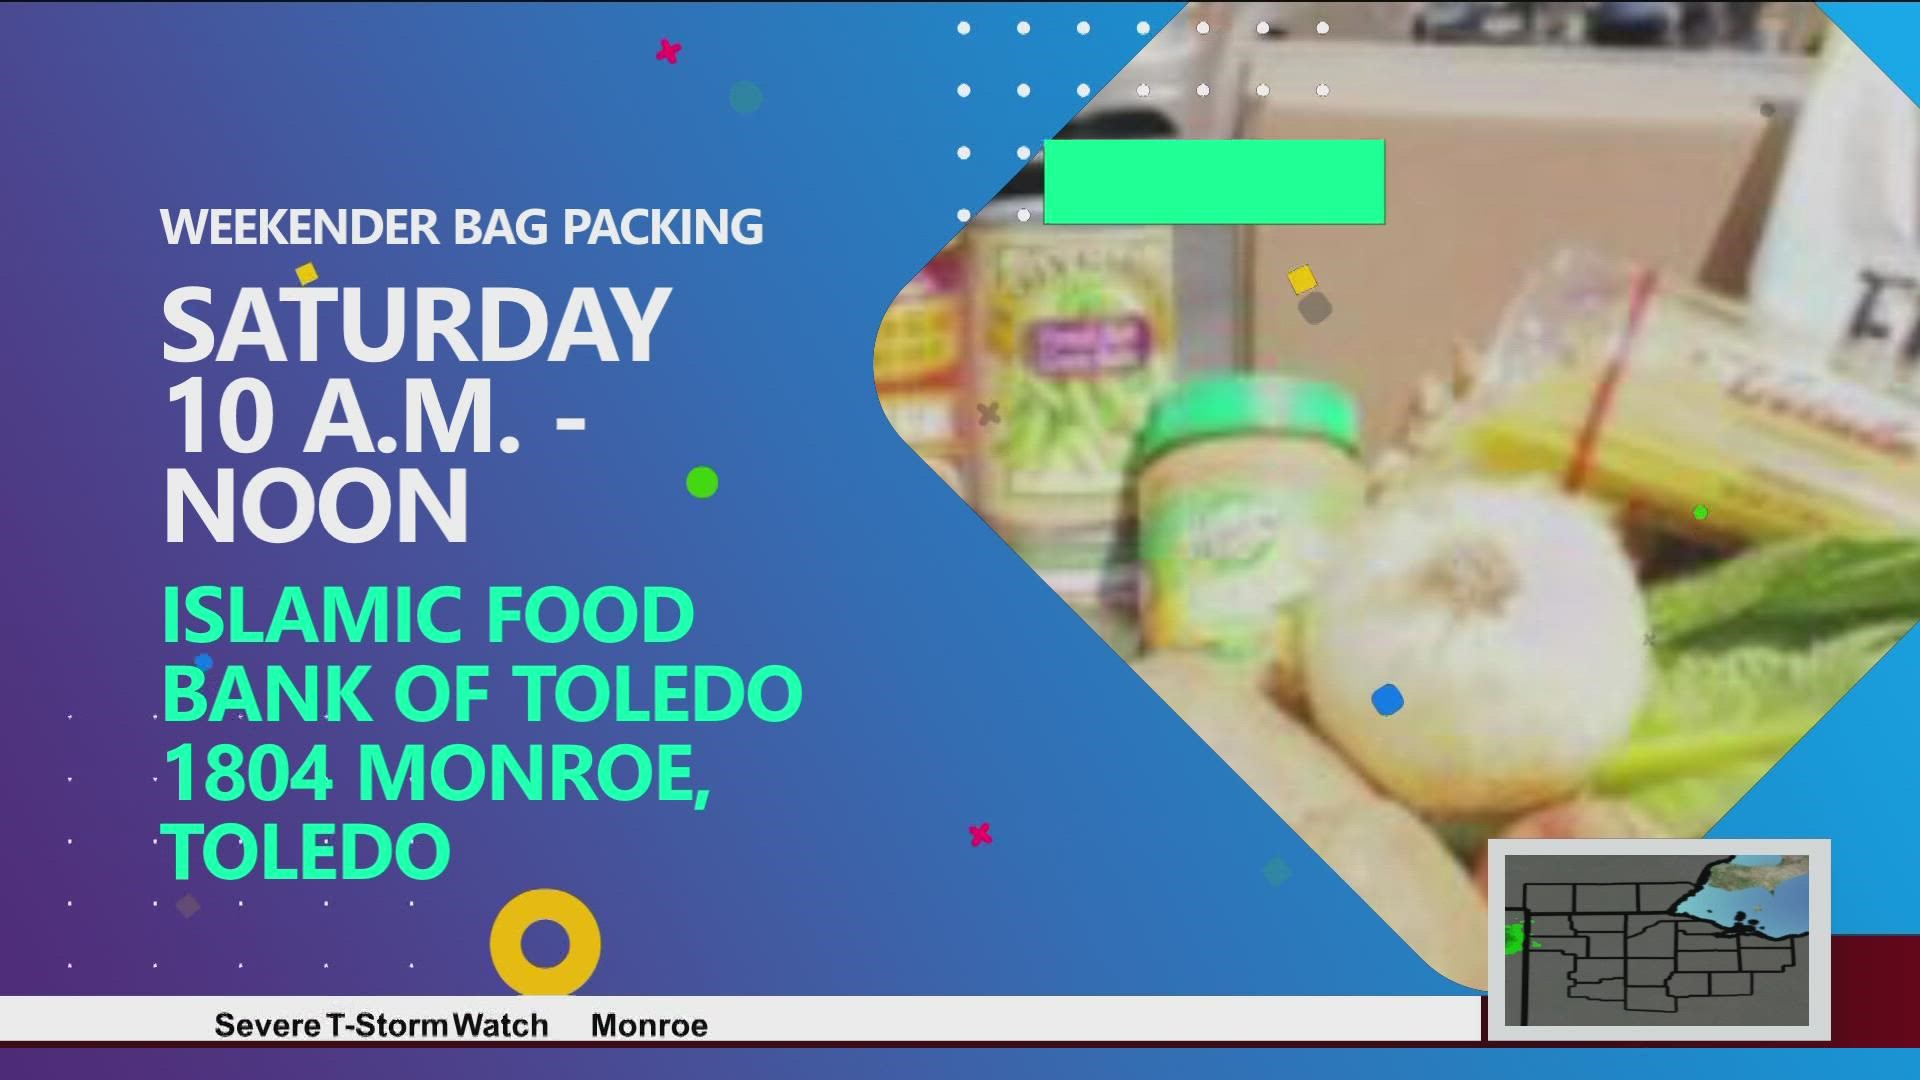 The Toledo Bar Association and Islamic Food Bank of Toledo have partnered up to pack "weekender bags" for child food insecurity.